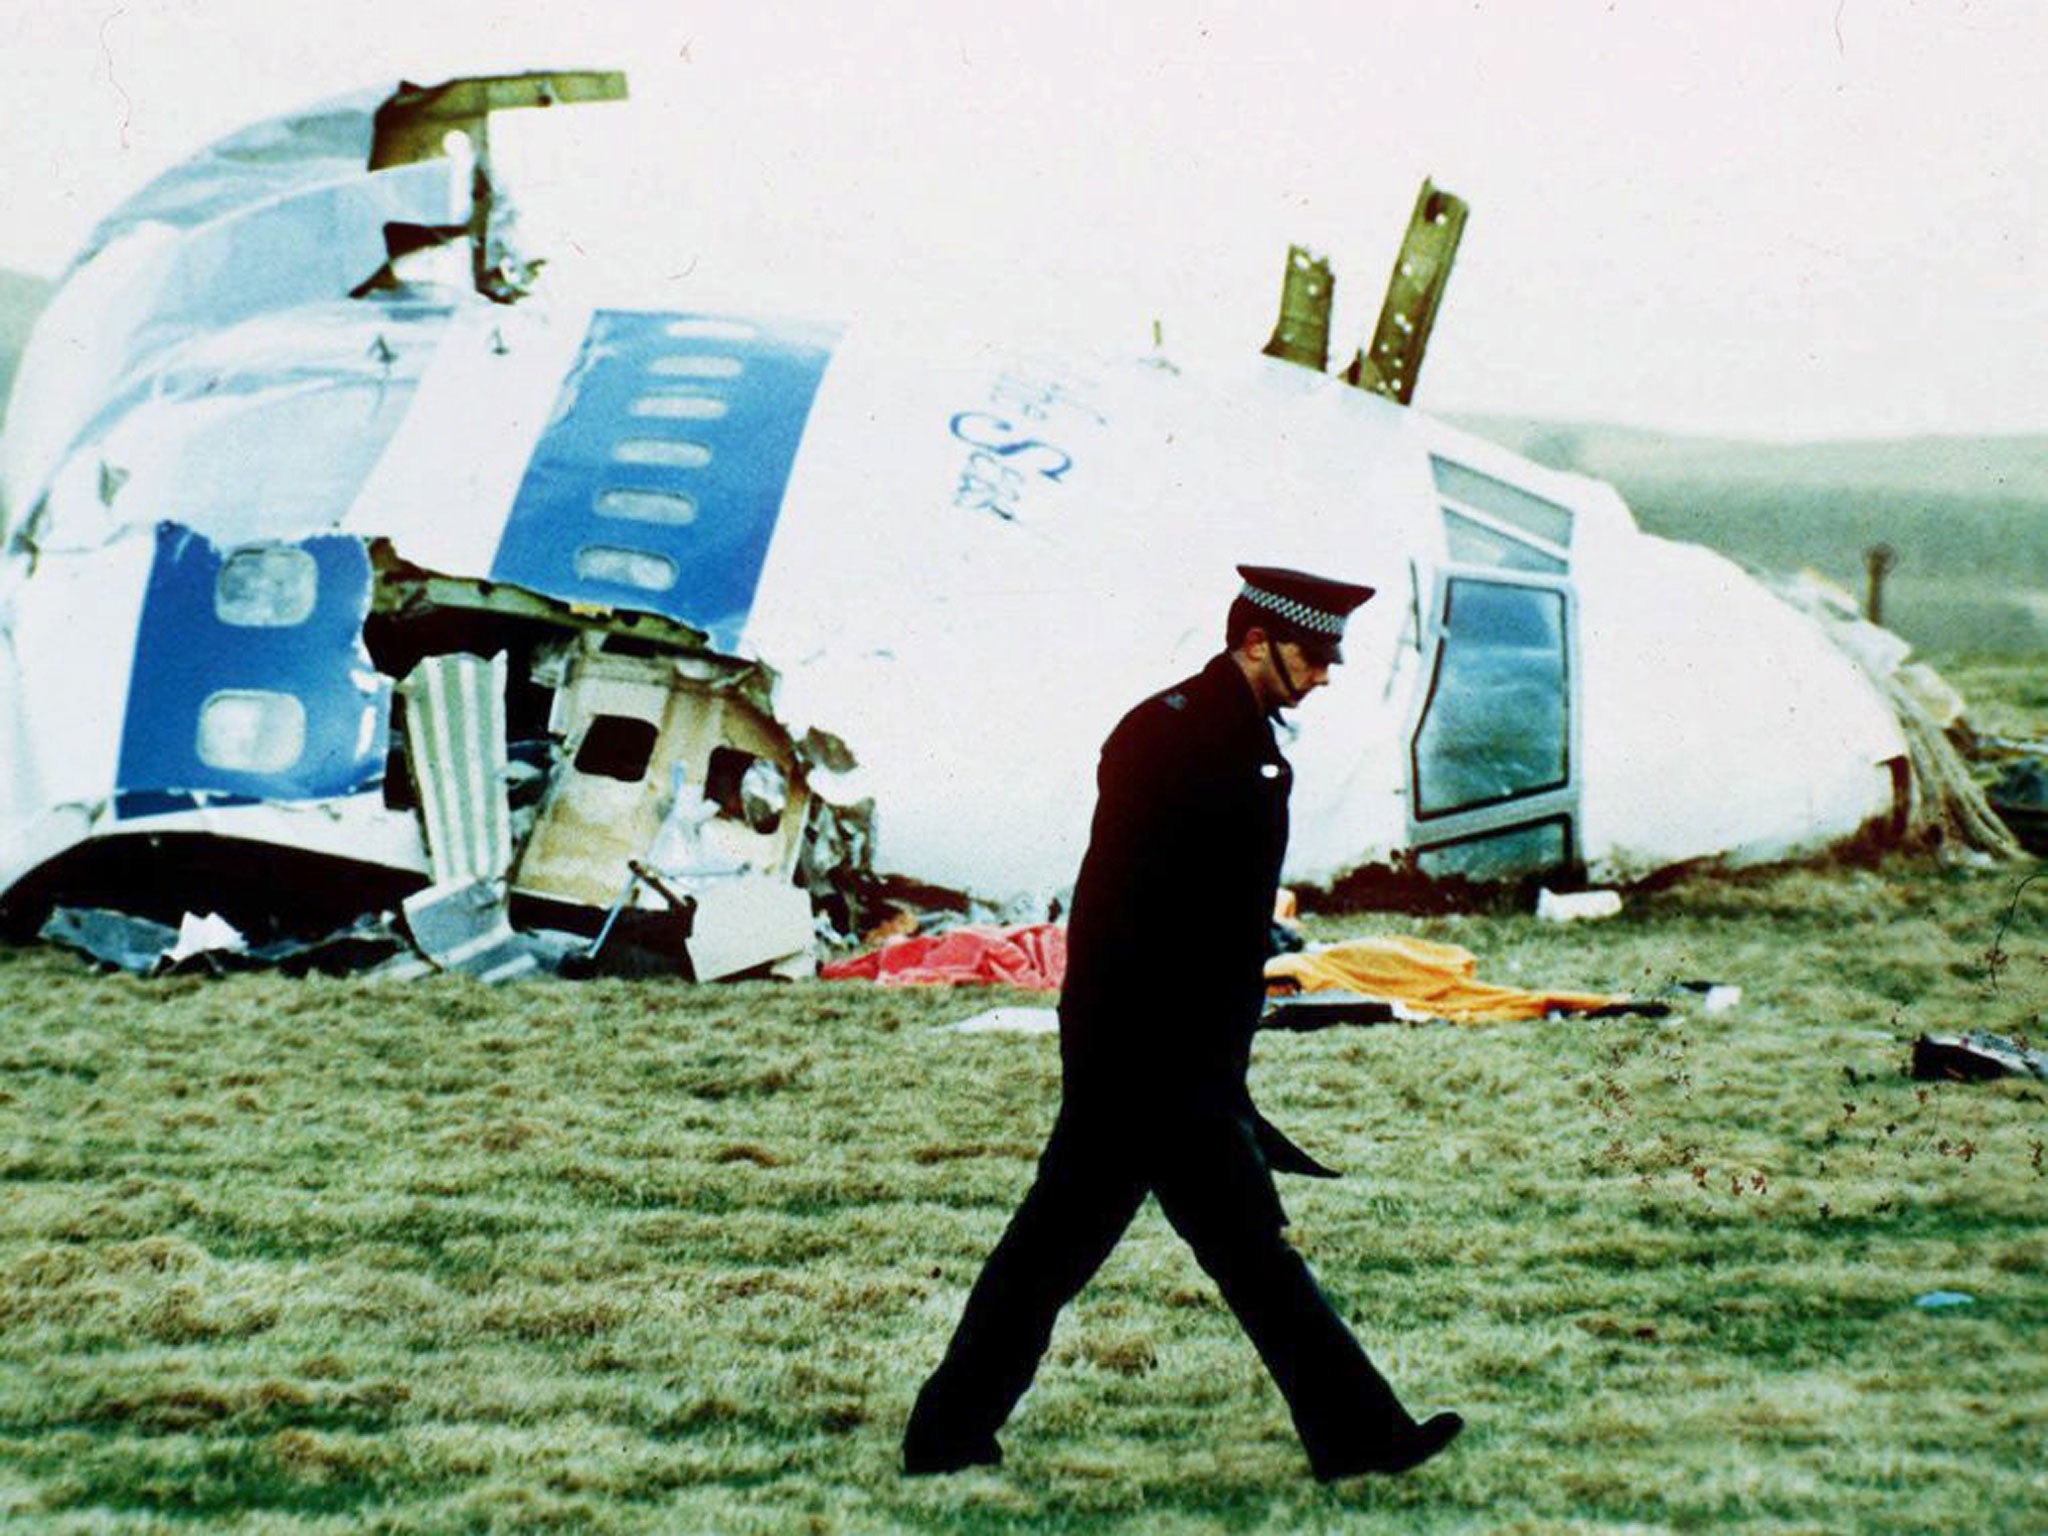 Colossal wreck: 270 people died when Pan-Am 103 crashed near the Scottish town of Lockerbie